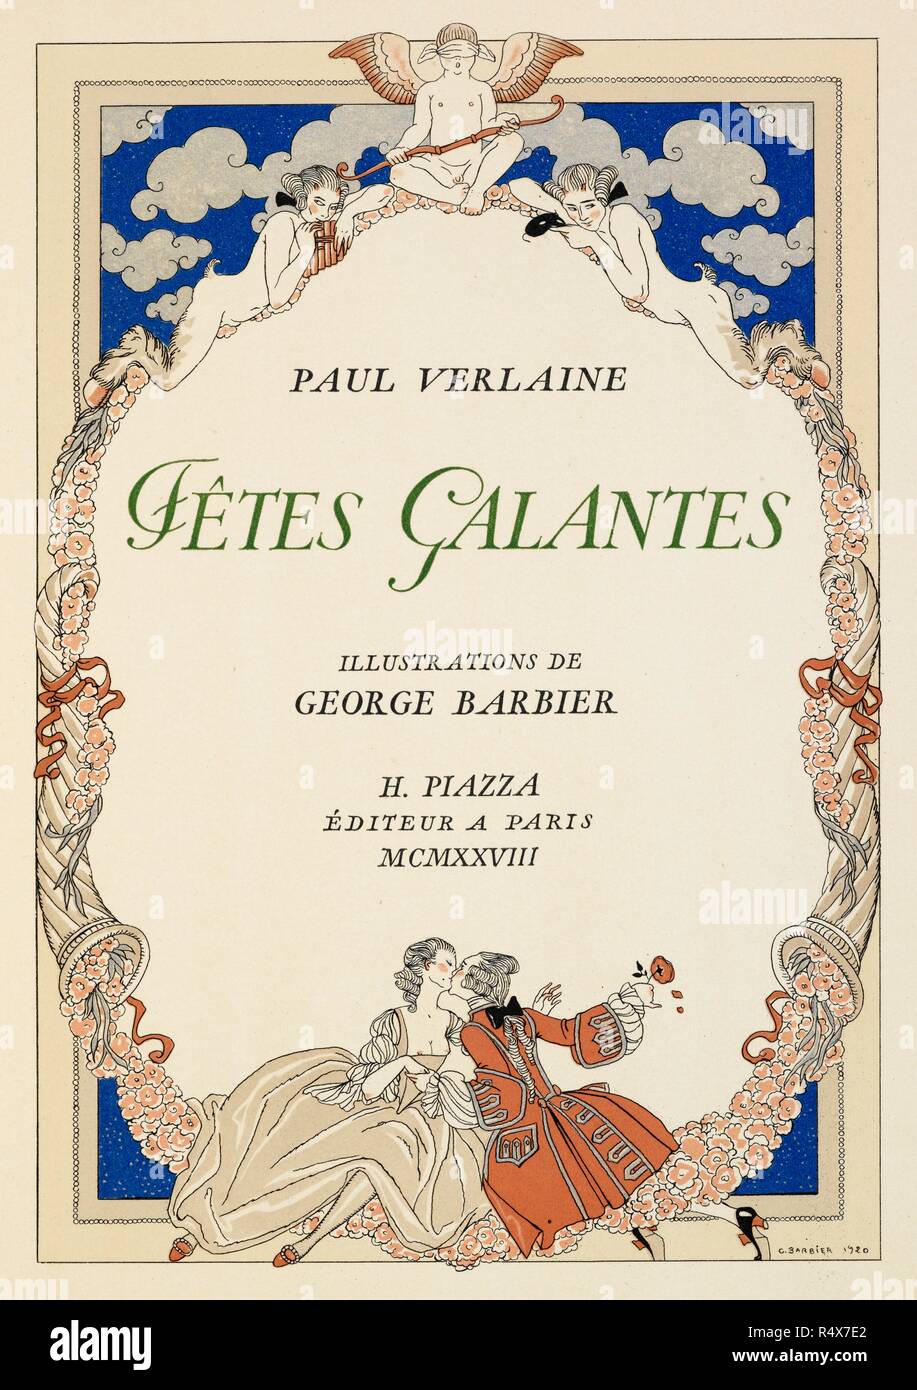 A man and woman kissing. FÃªtes galantes. [PoÃ¨mes]. Illustrations de George Barbier. Paris: H. Piazza, 1928. FÃªtes Galantes is an album consisting of romantic prints of French life among the upper classes of the 19th century. Rich aristocrats of the French court used to play gallant scenes from the commedia dellâ€™ arte that were called Fetes Galantes. The prints accompany Paul Verlaine's poetry. Each album contains 20 lithograph prints with pochoir highlighting by George Barbier. Source: L.45/2847, title page. Language: French. Stock Photo